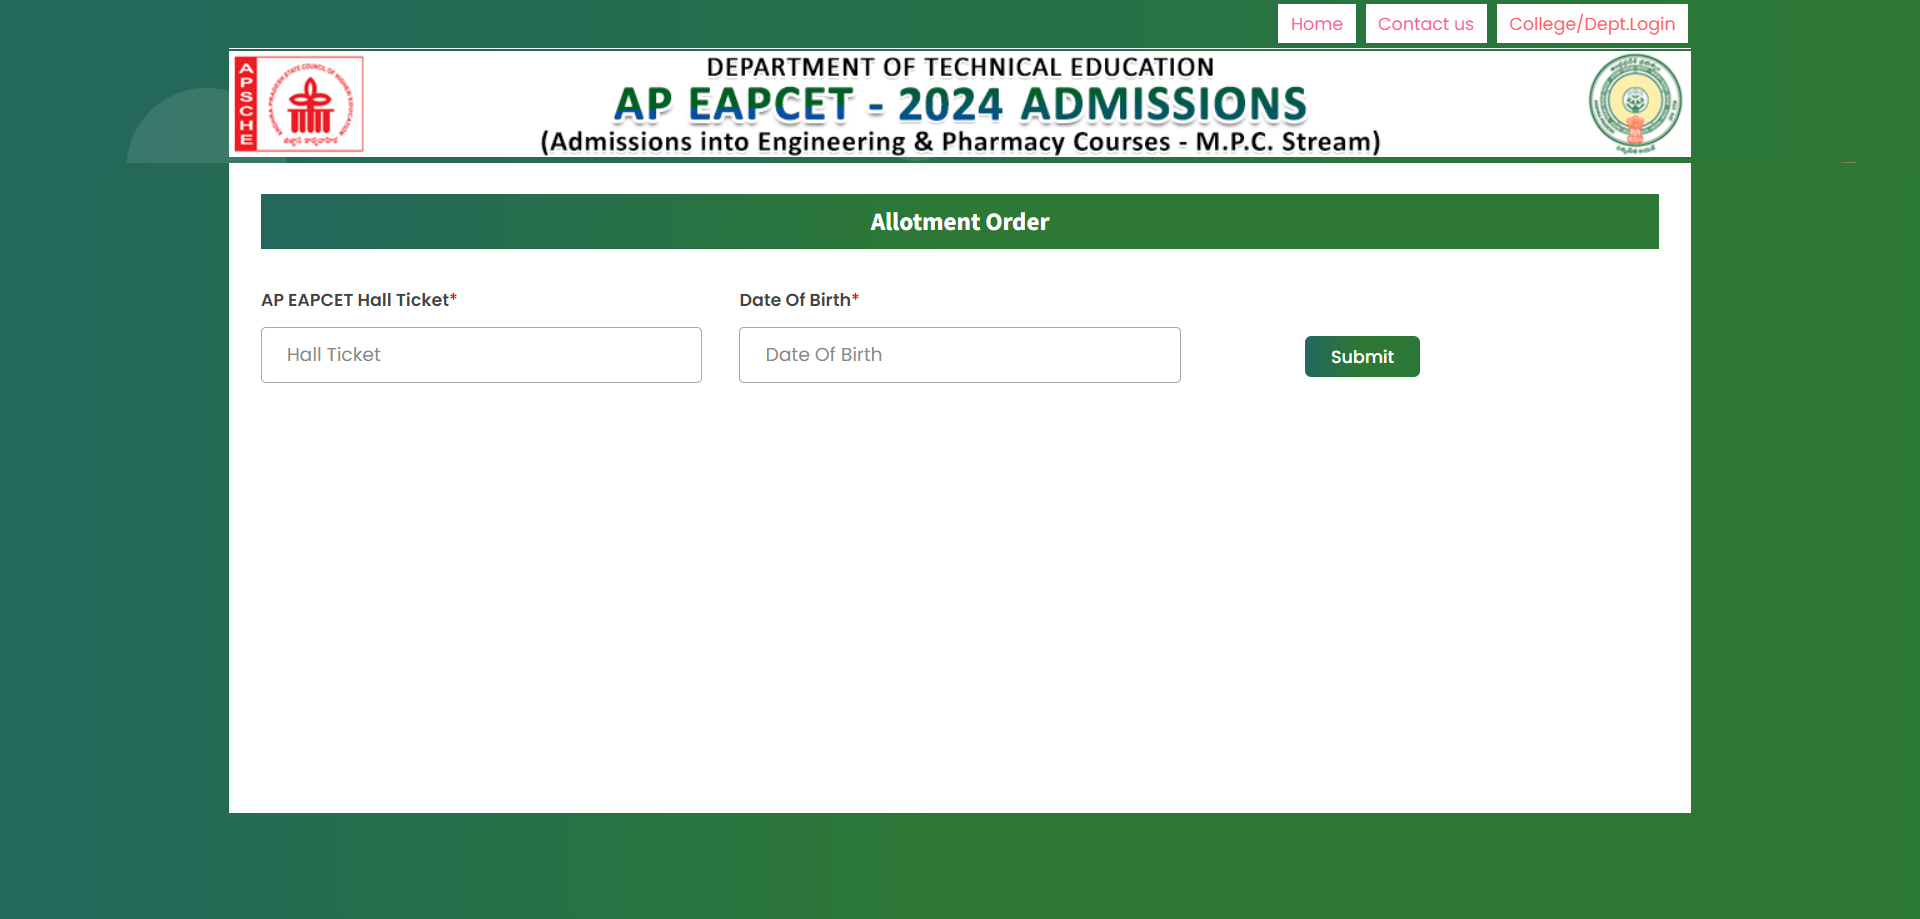 AP EAMCET Round 1 Seat Allotment Result 2024